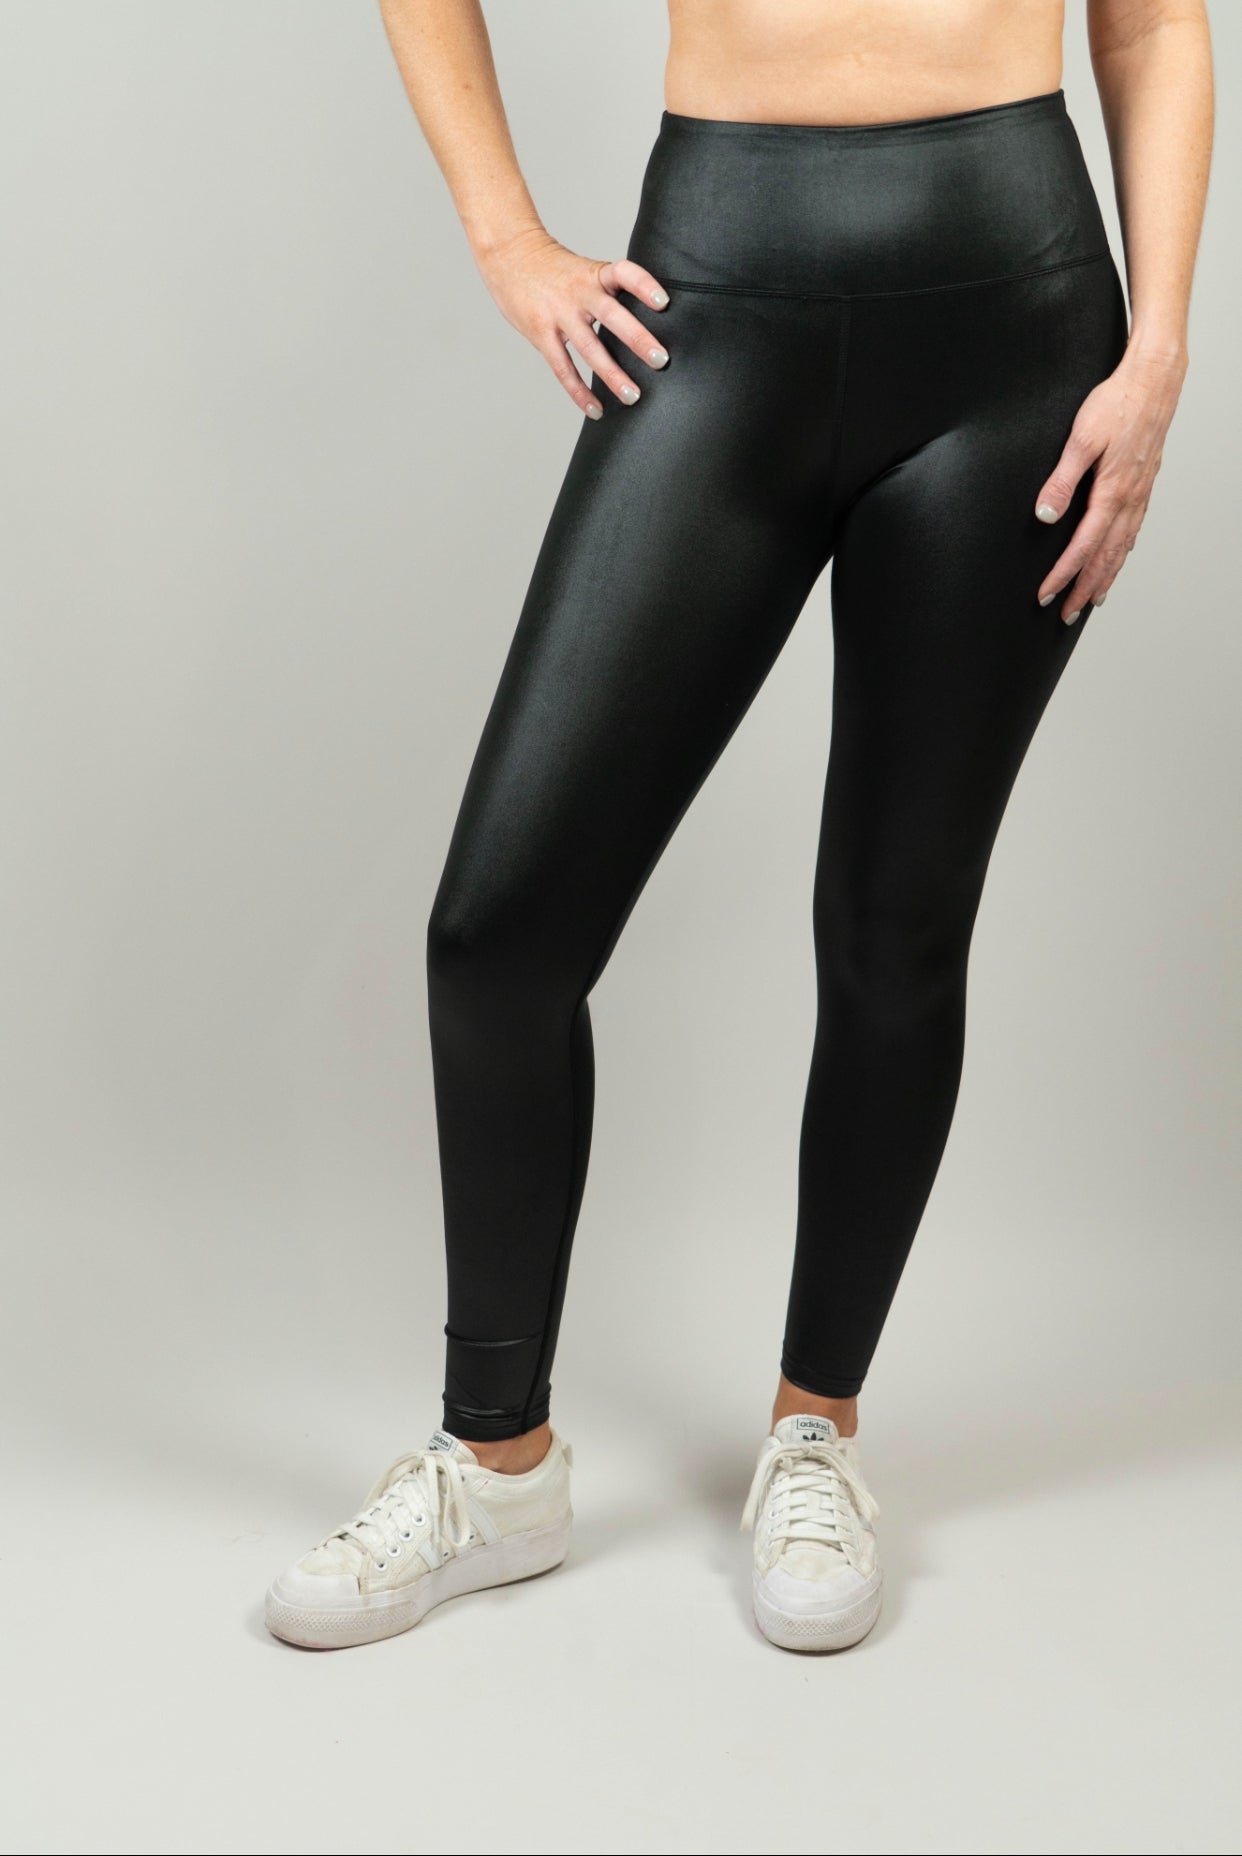 Leggings Leather High Spandex  Faux Leather Spandex Leggings - Leggings  Women Black - Aliexpress